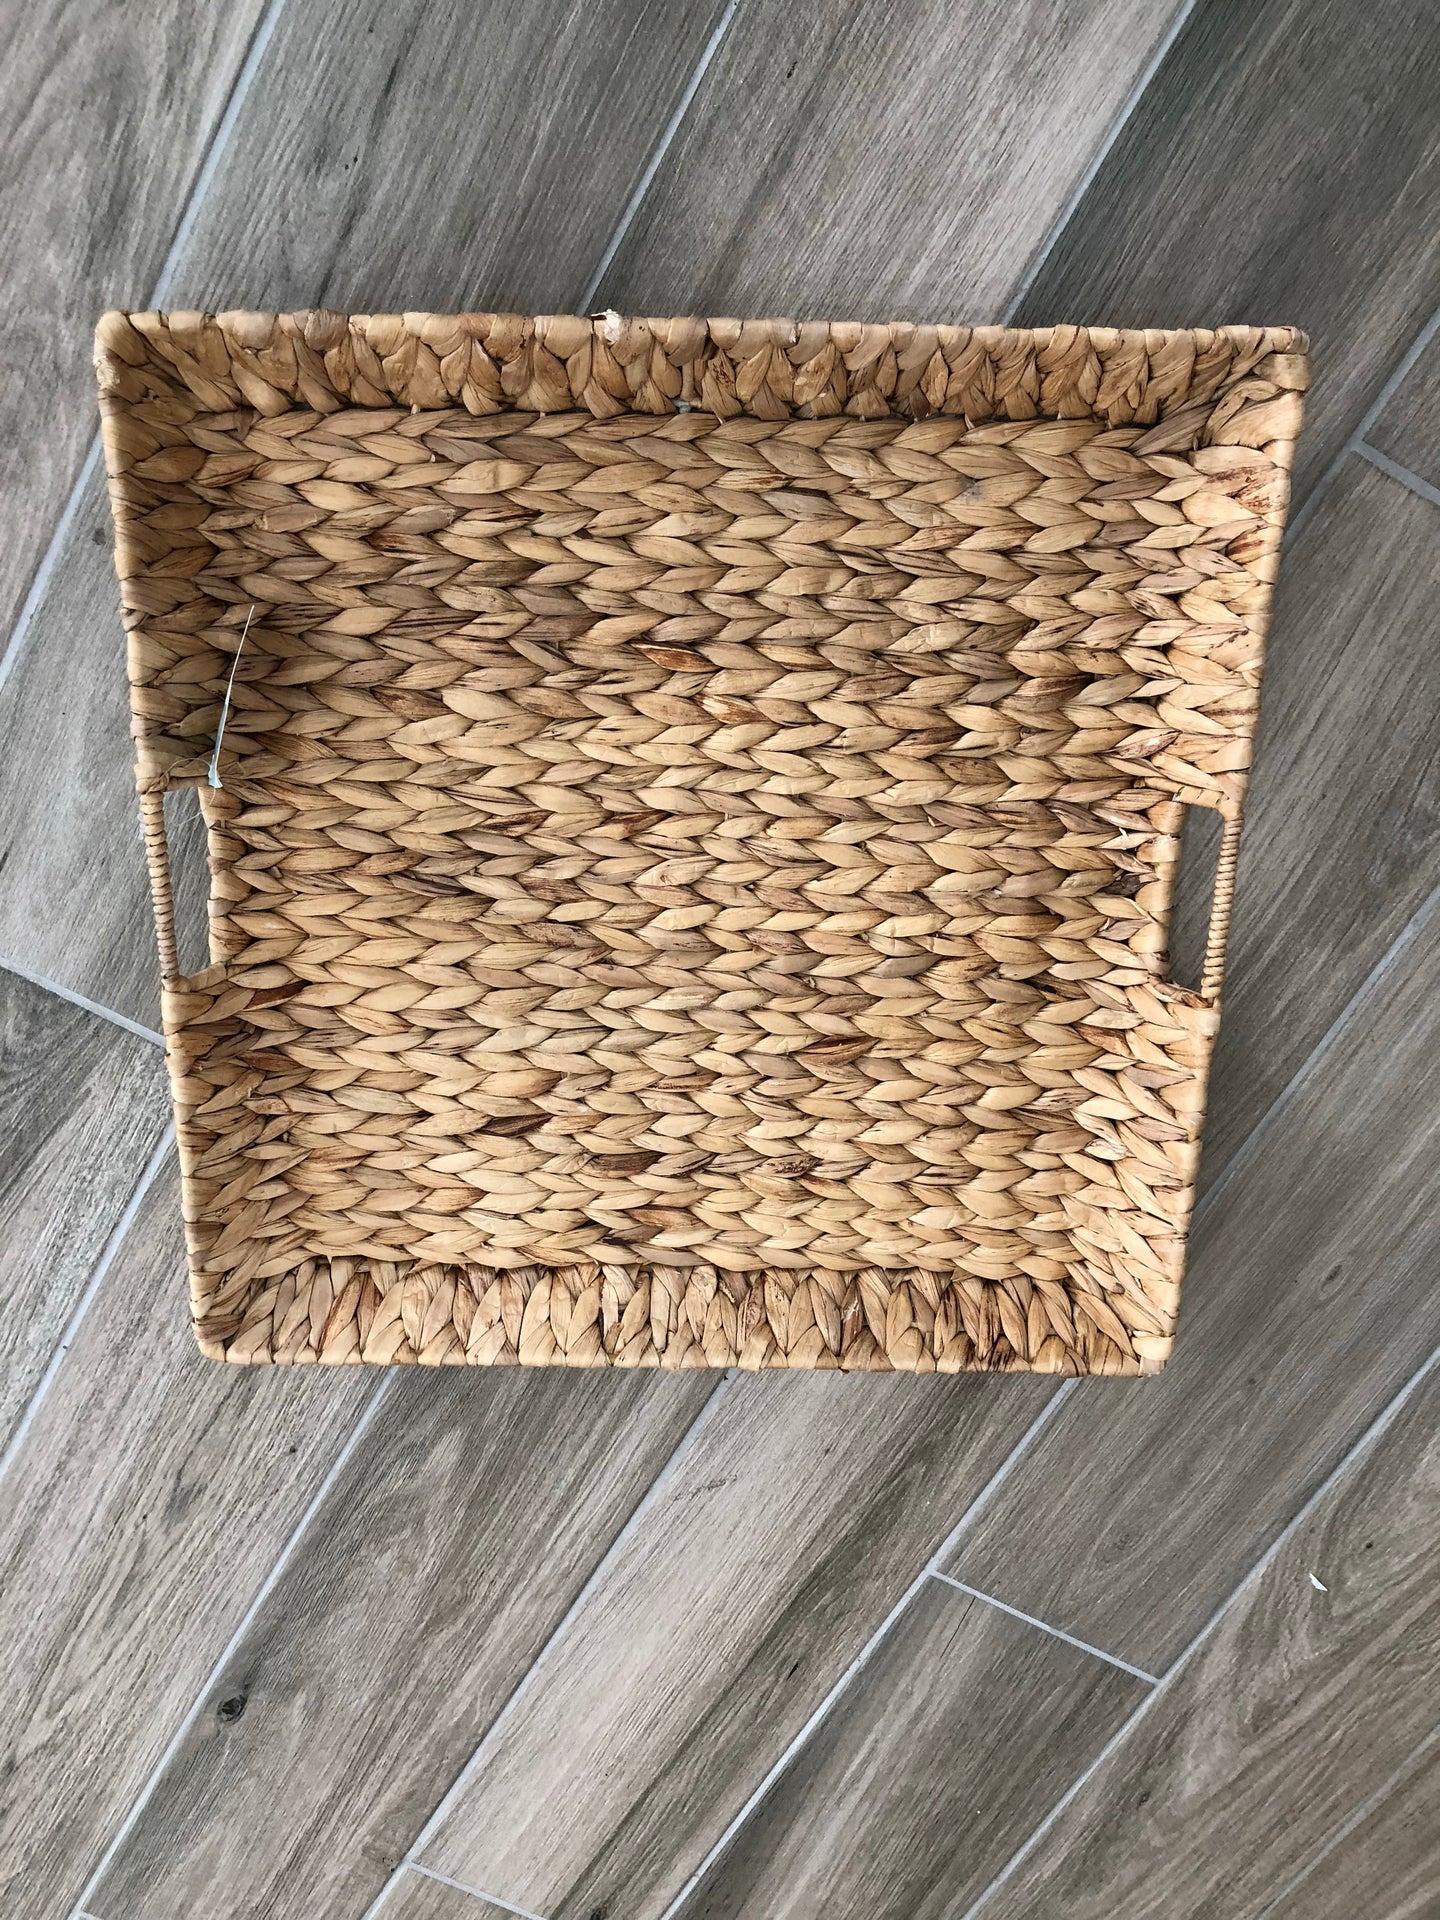 Willow Group Basket